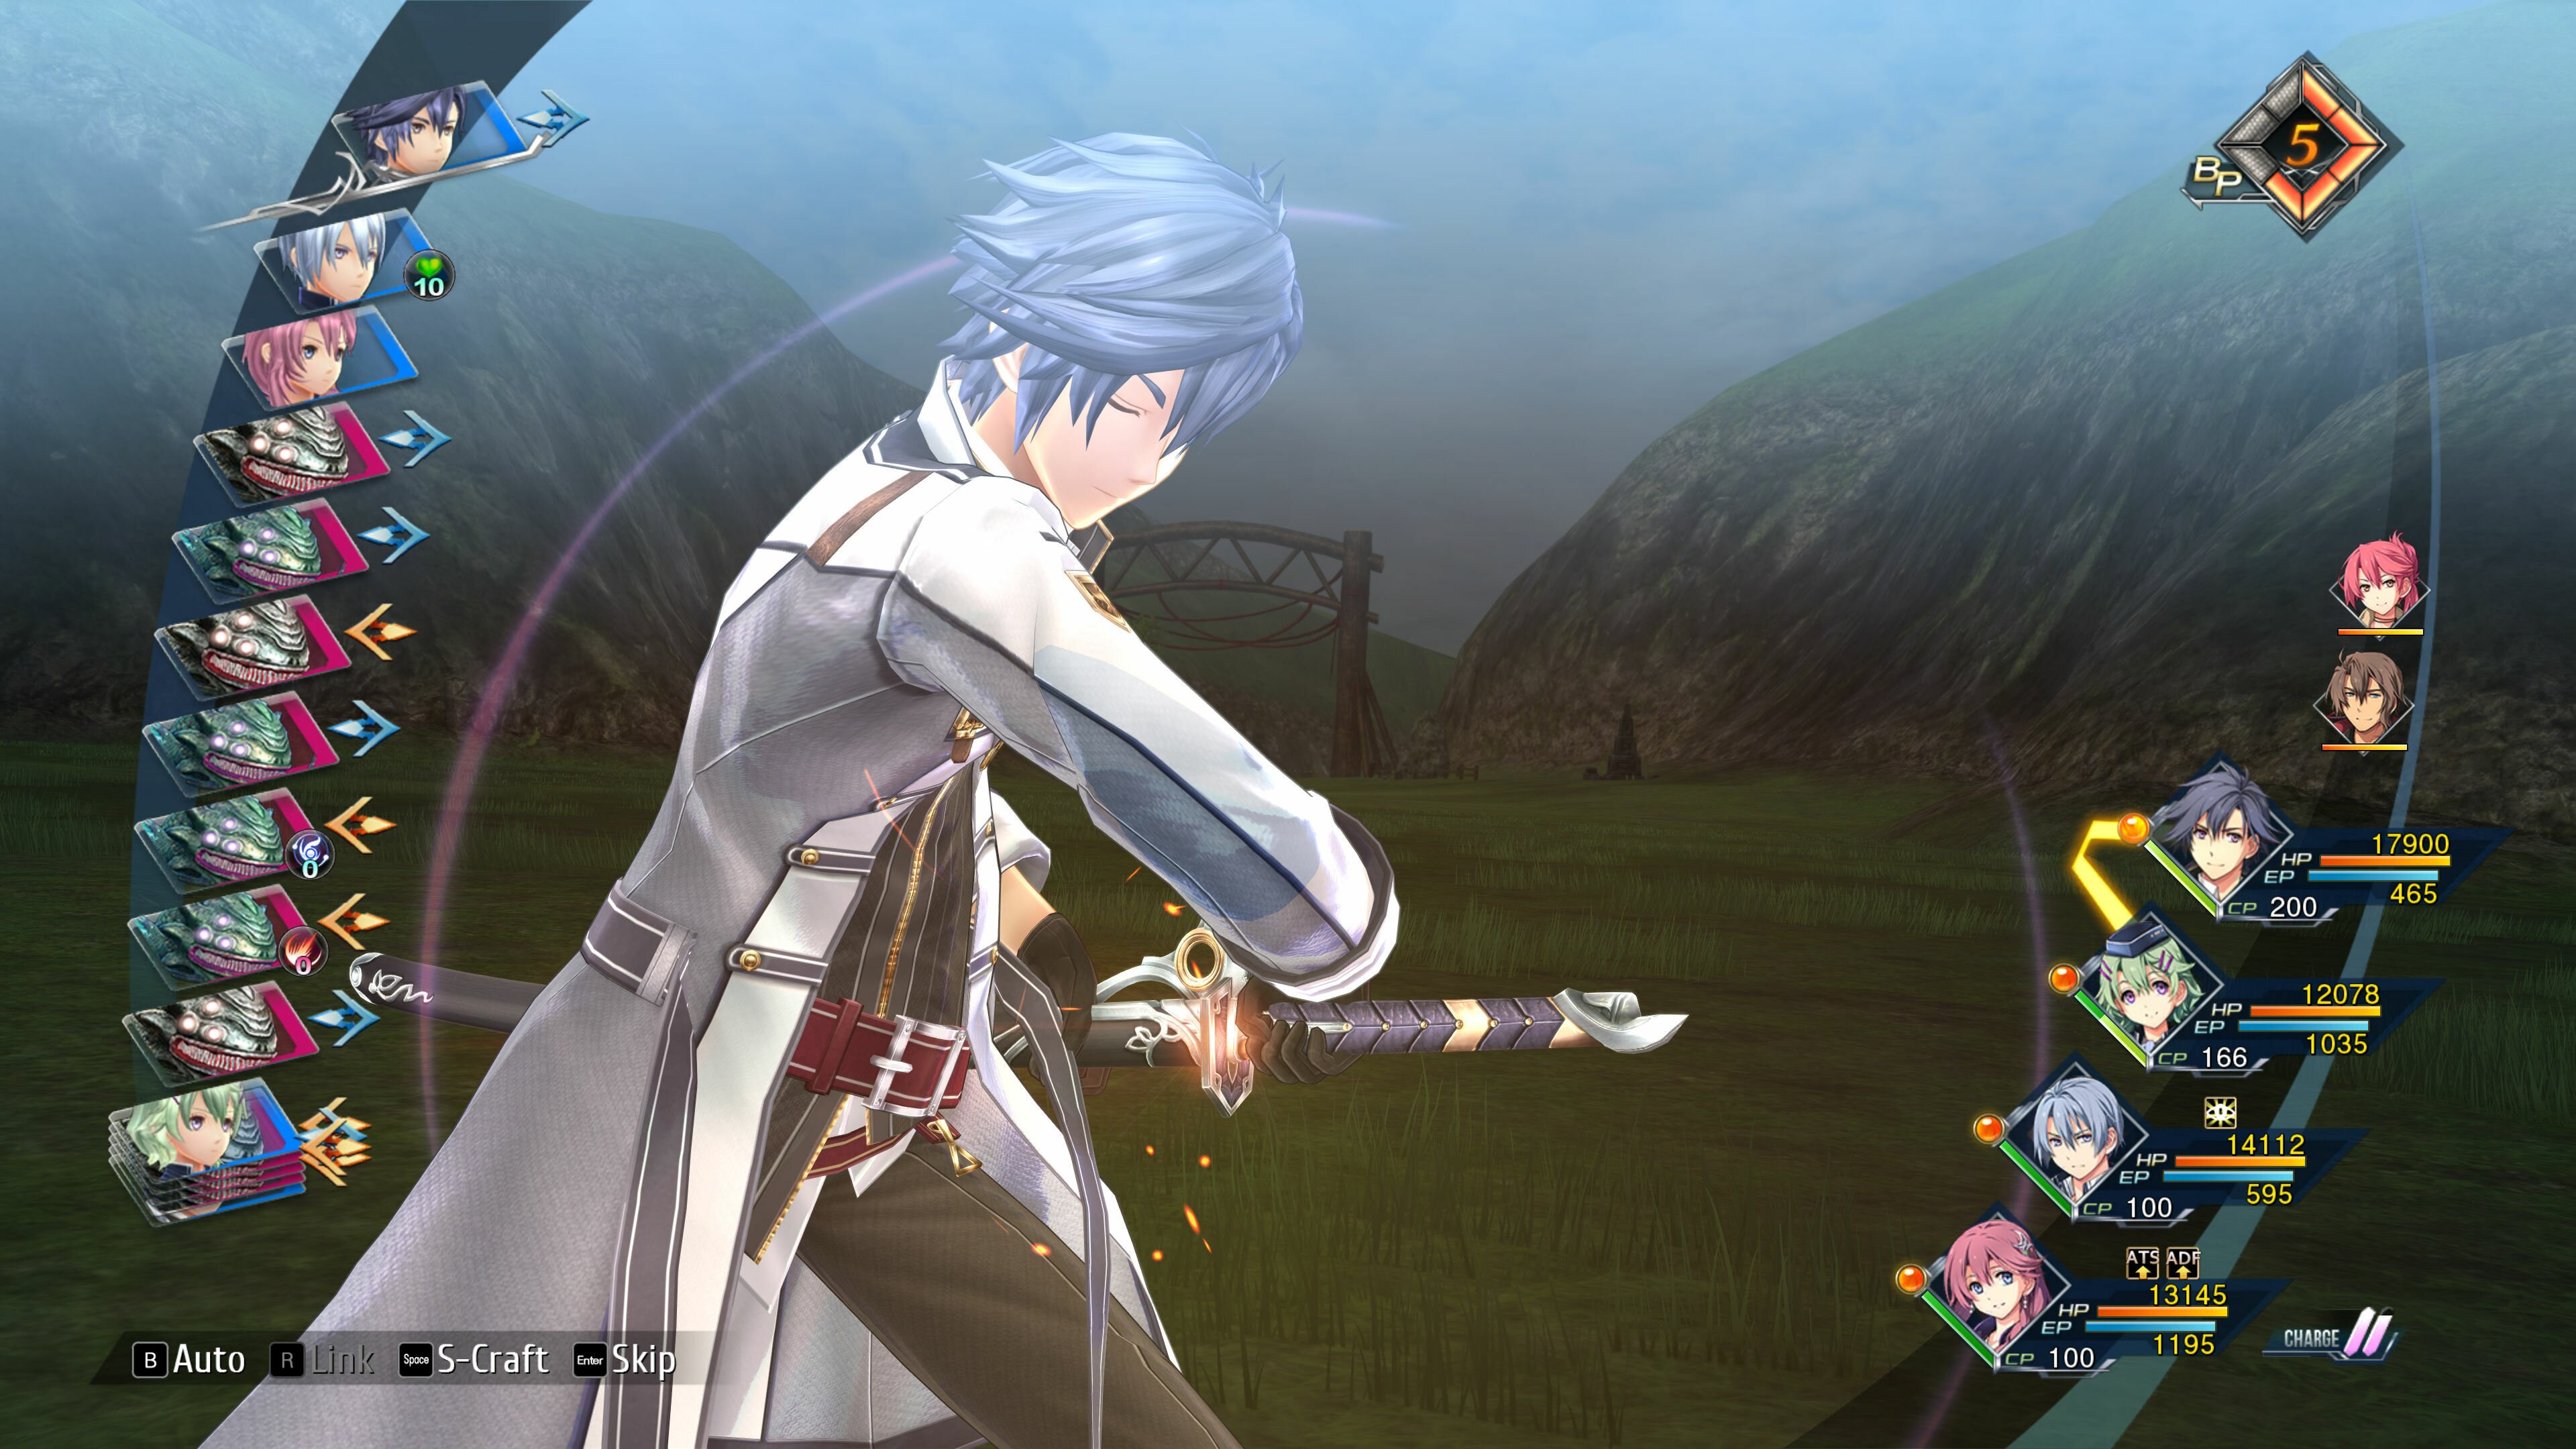 The Legend of Heroes: Trails into Reverie free download